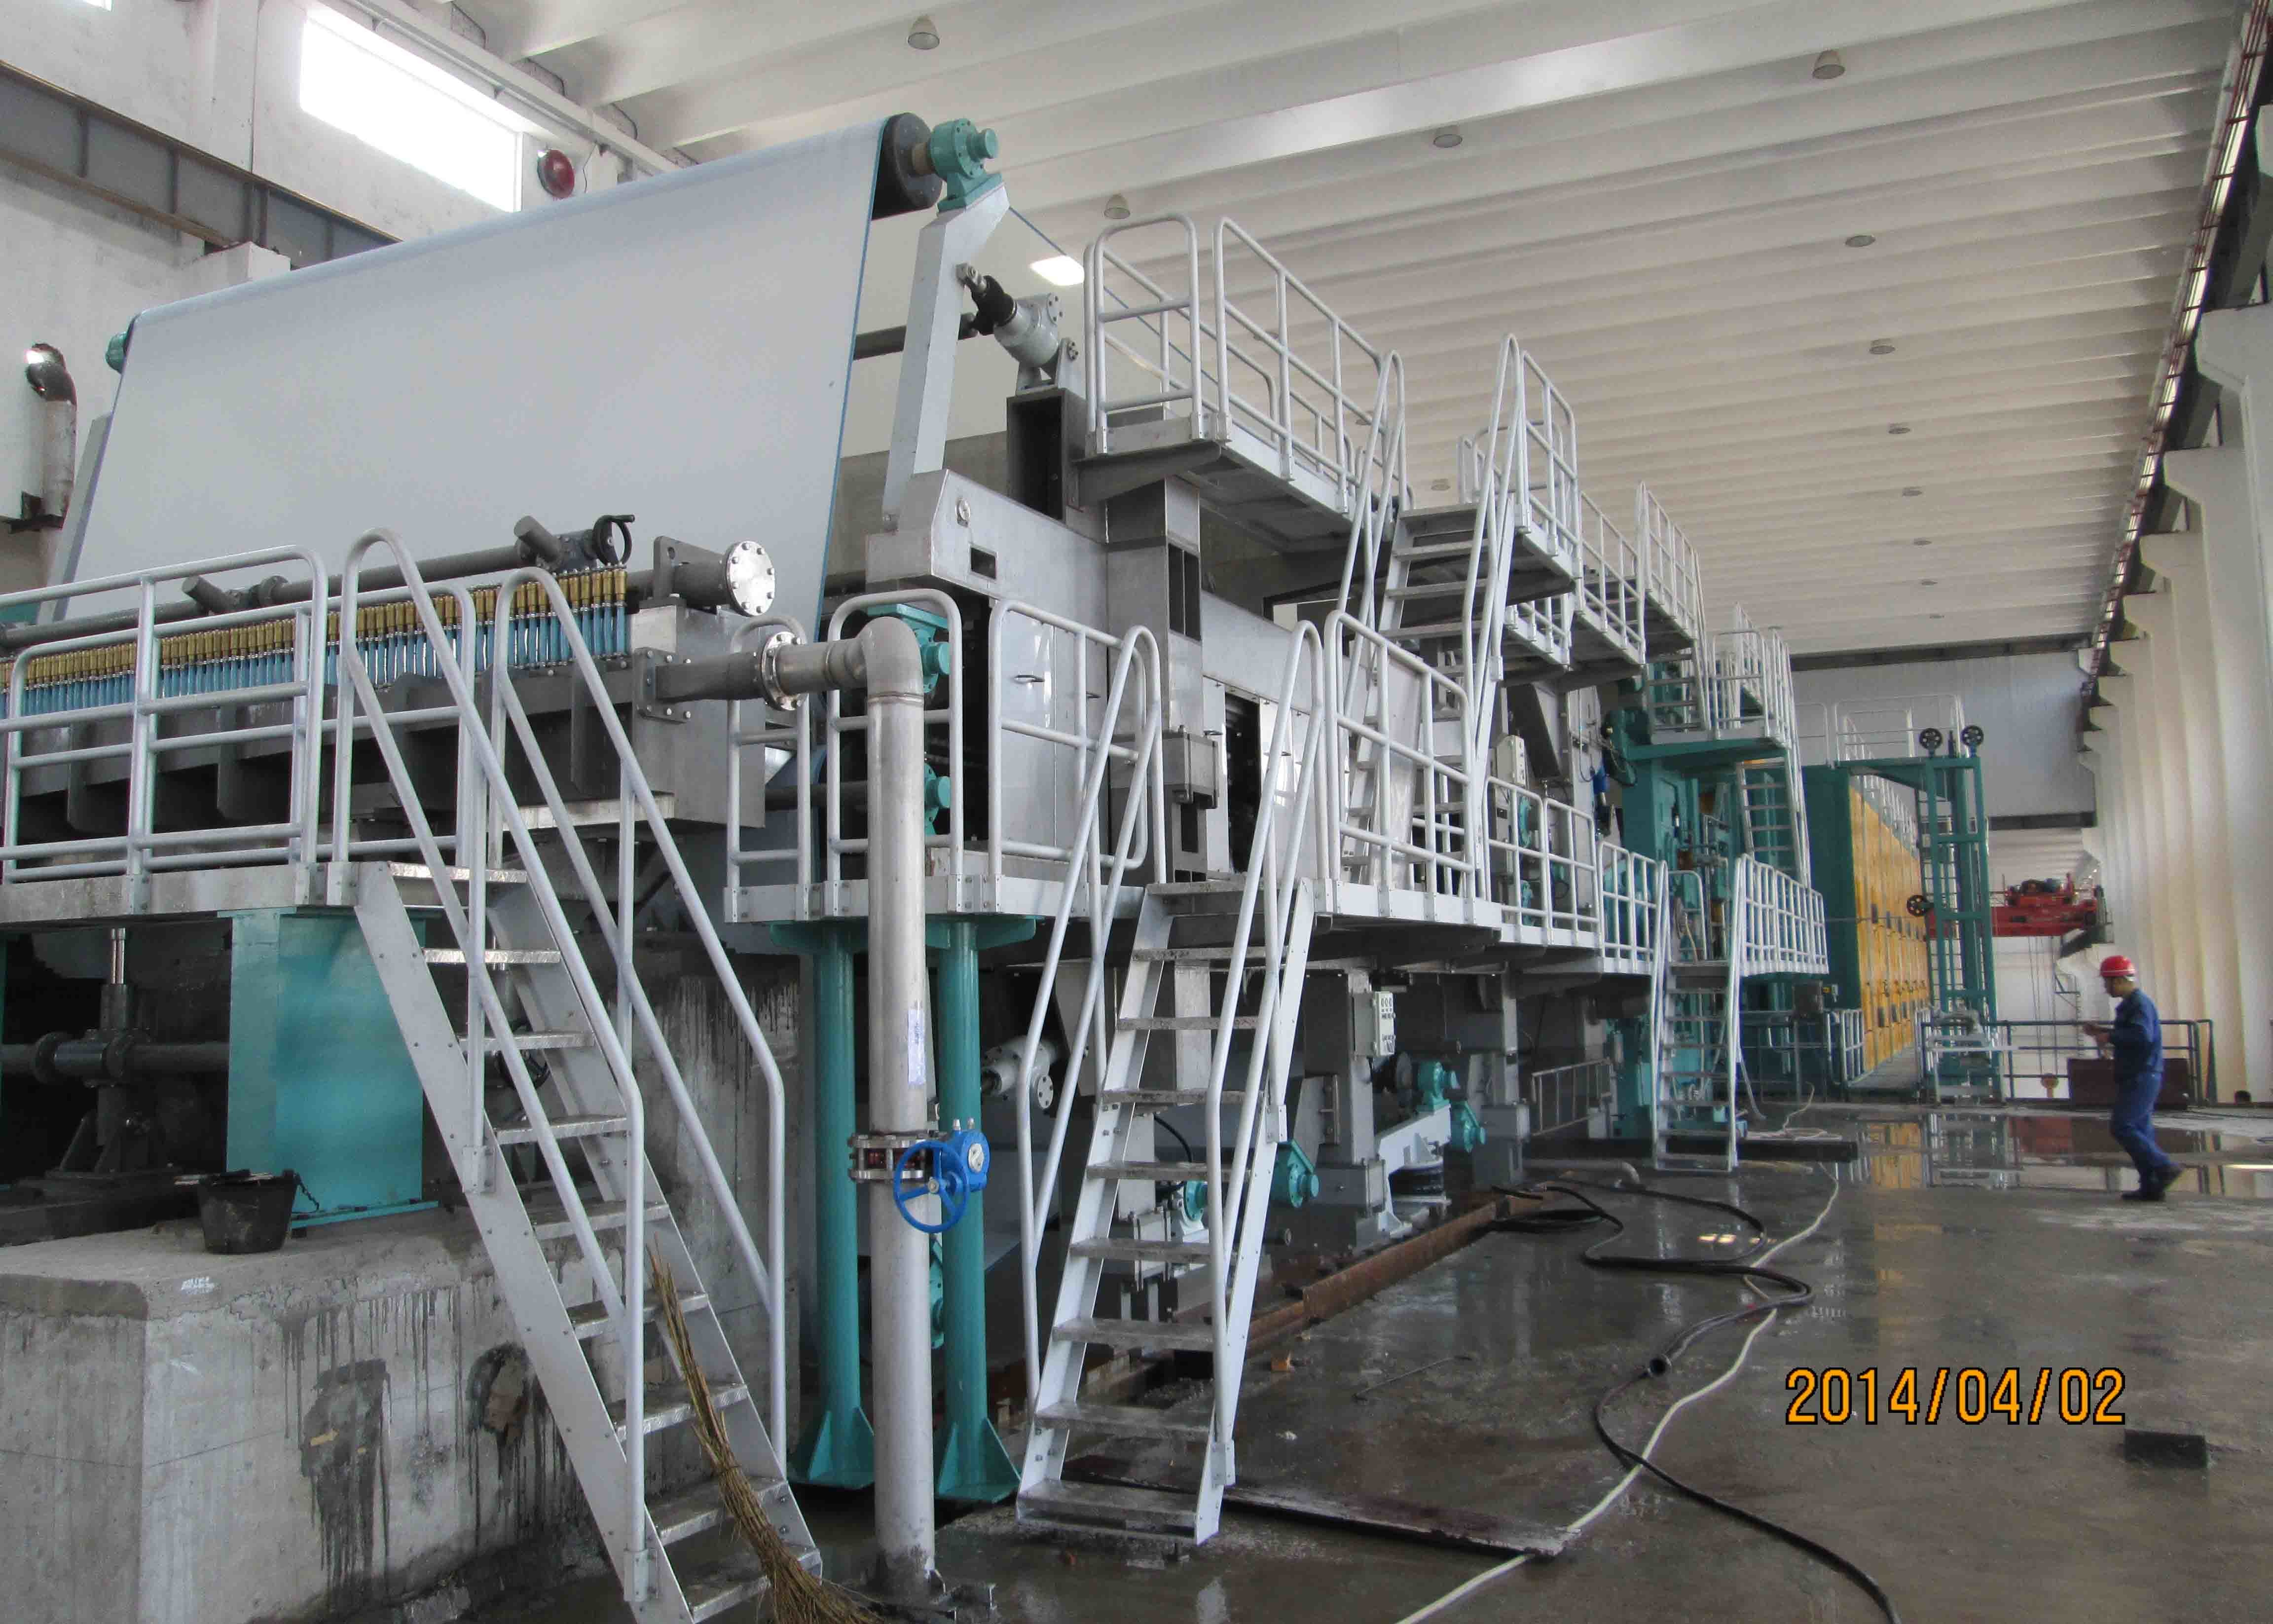 Quality Hot Air Pulp Drying Machine With Hydraulic Headbox Stainless Steel for sale